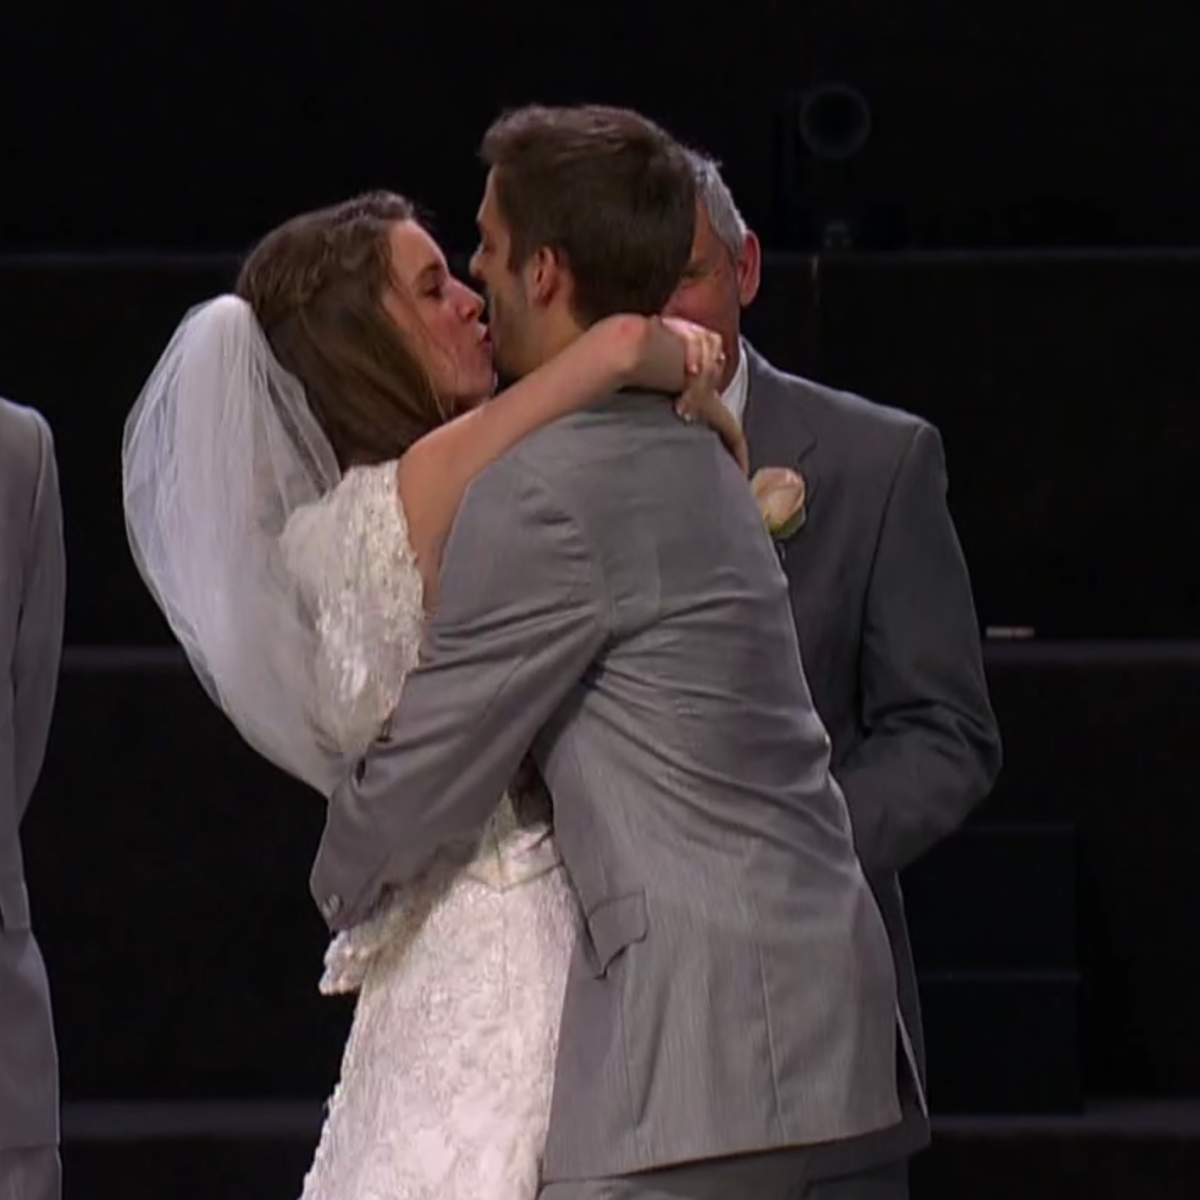 Did any duggars kiss before marriage?